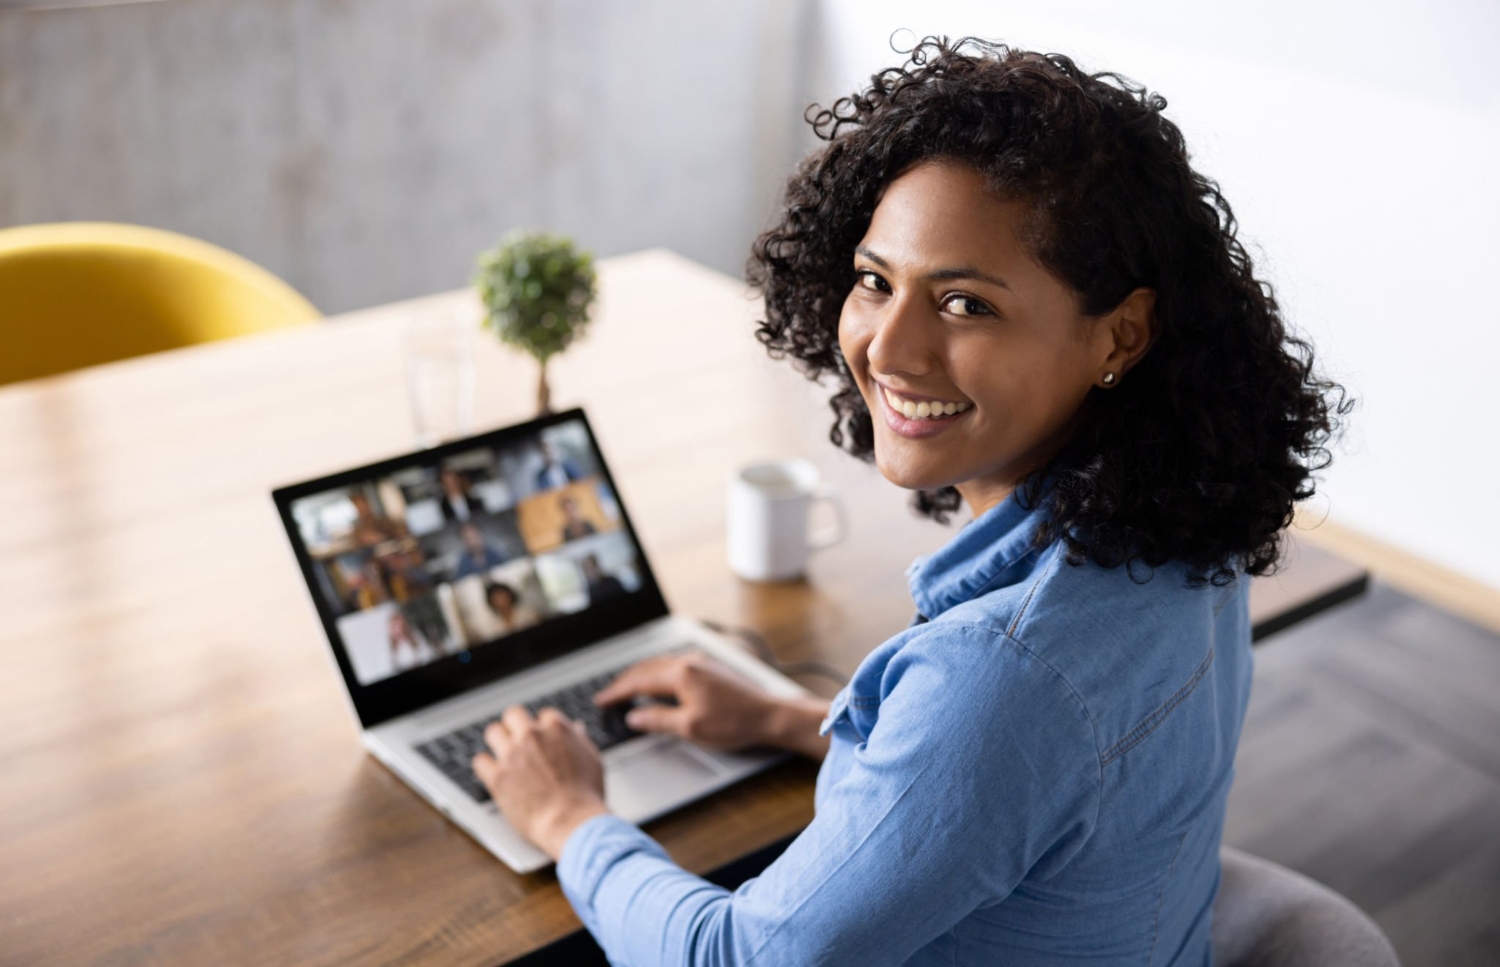 Happy woman on a business meeting via video call